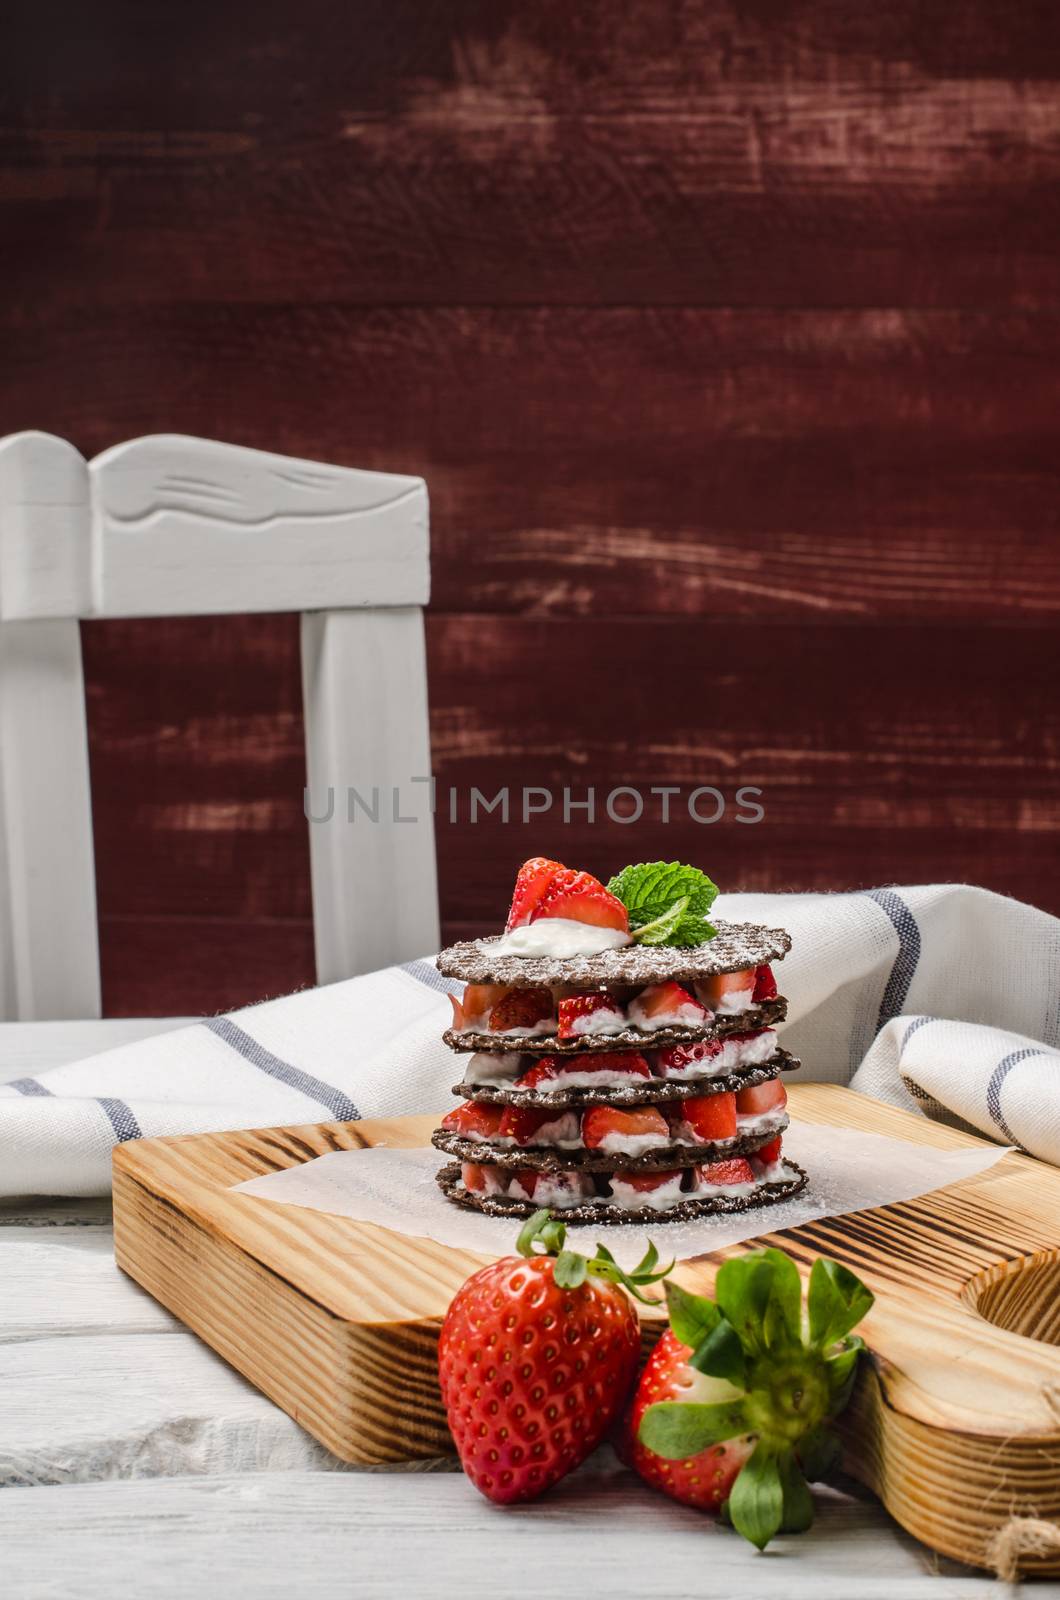 Chocolate belgian waffles with strawberries by AnaMarques